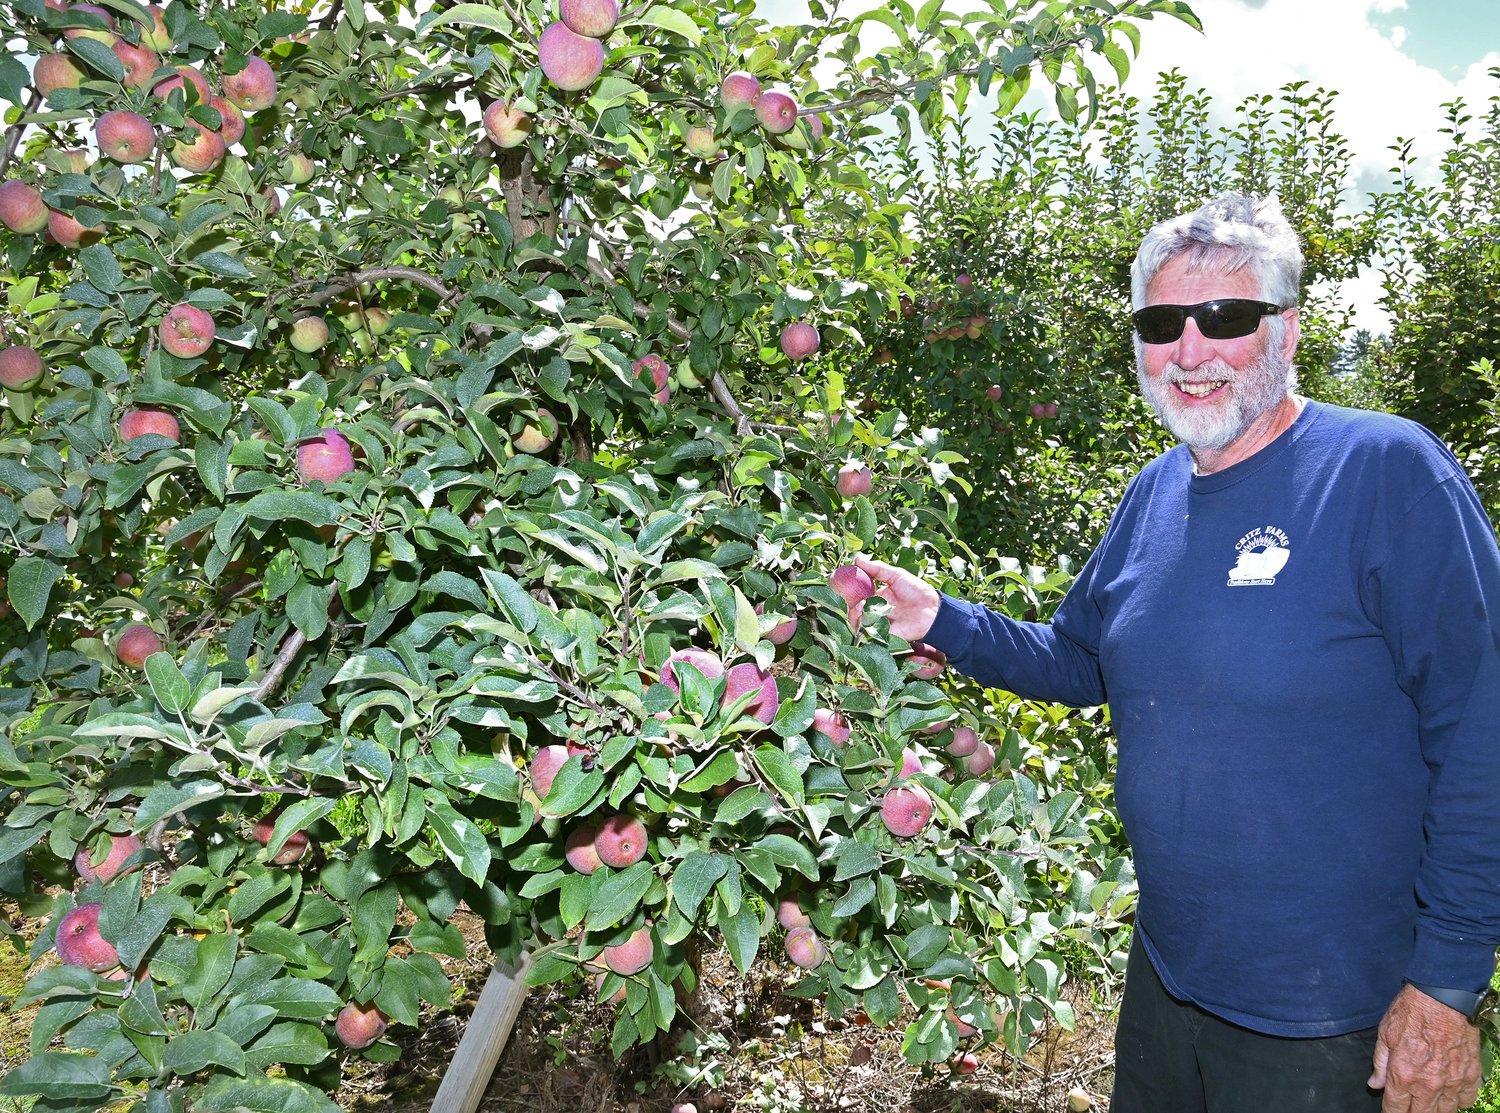 Matthew Critz with a tree full of Empire apples in his orchard in Cazenovia Wednesday, August 31.